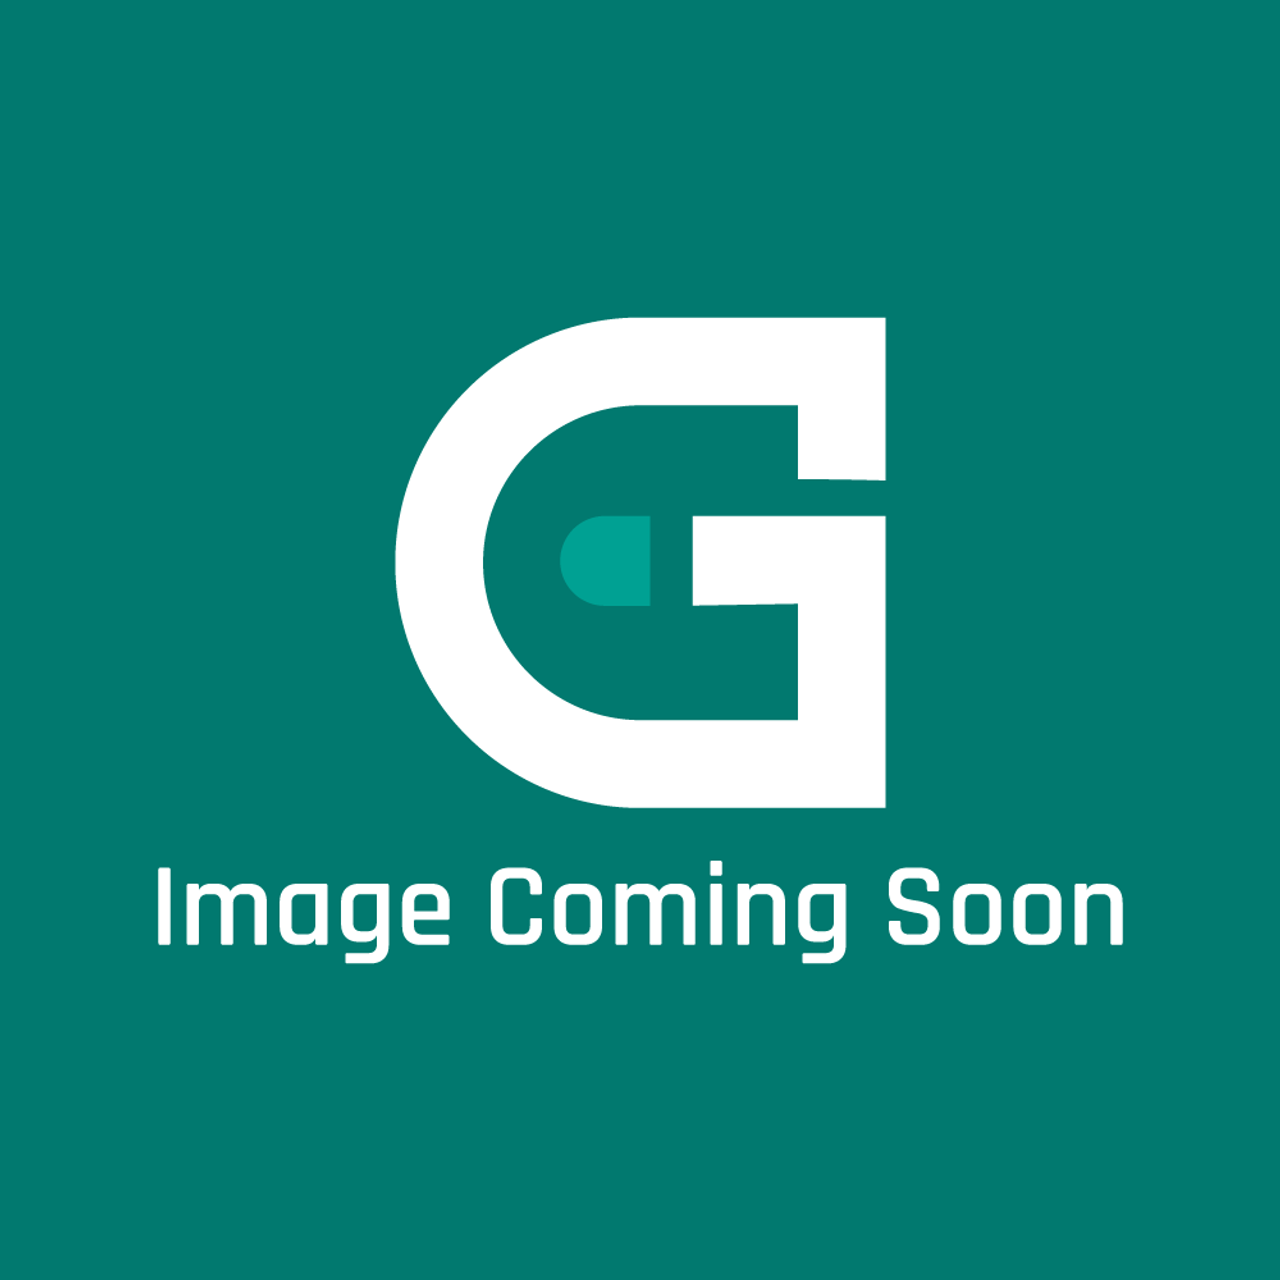 Frigidaire - Electrolux 5304404035 - GASKET-ALMOND - Image Coming Soon!